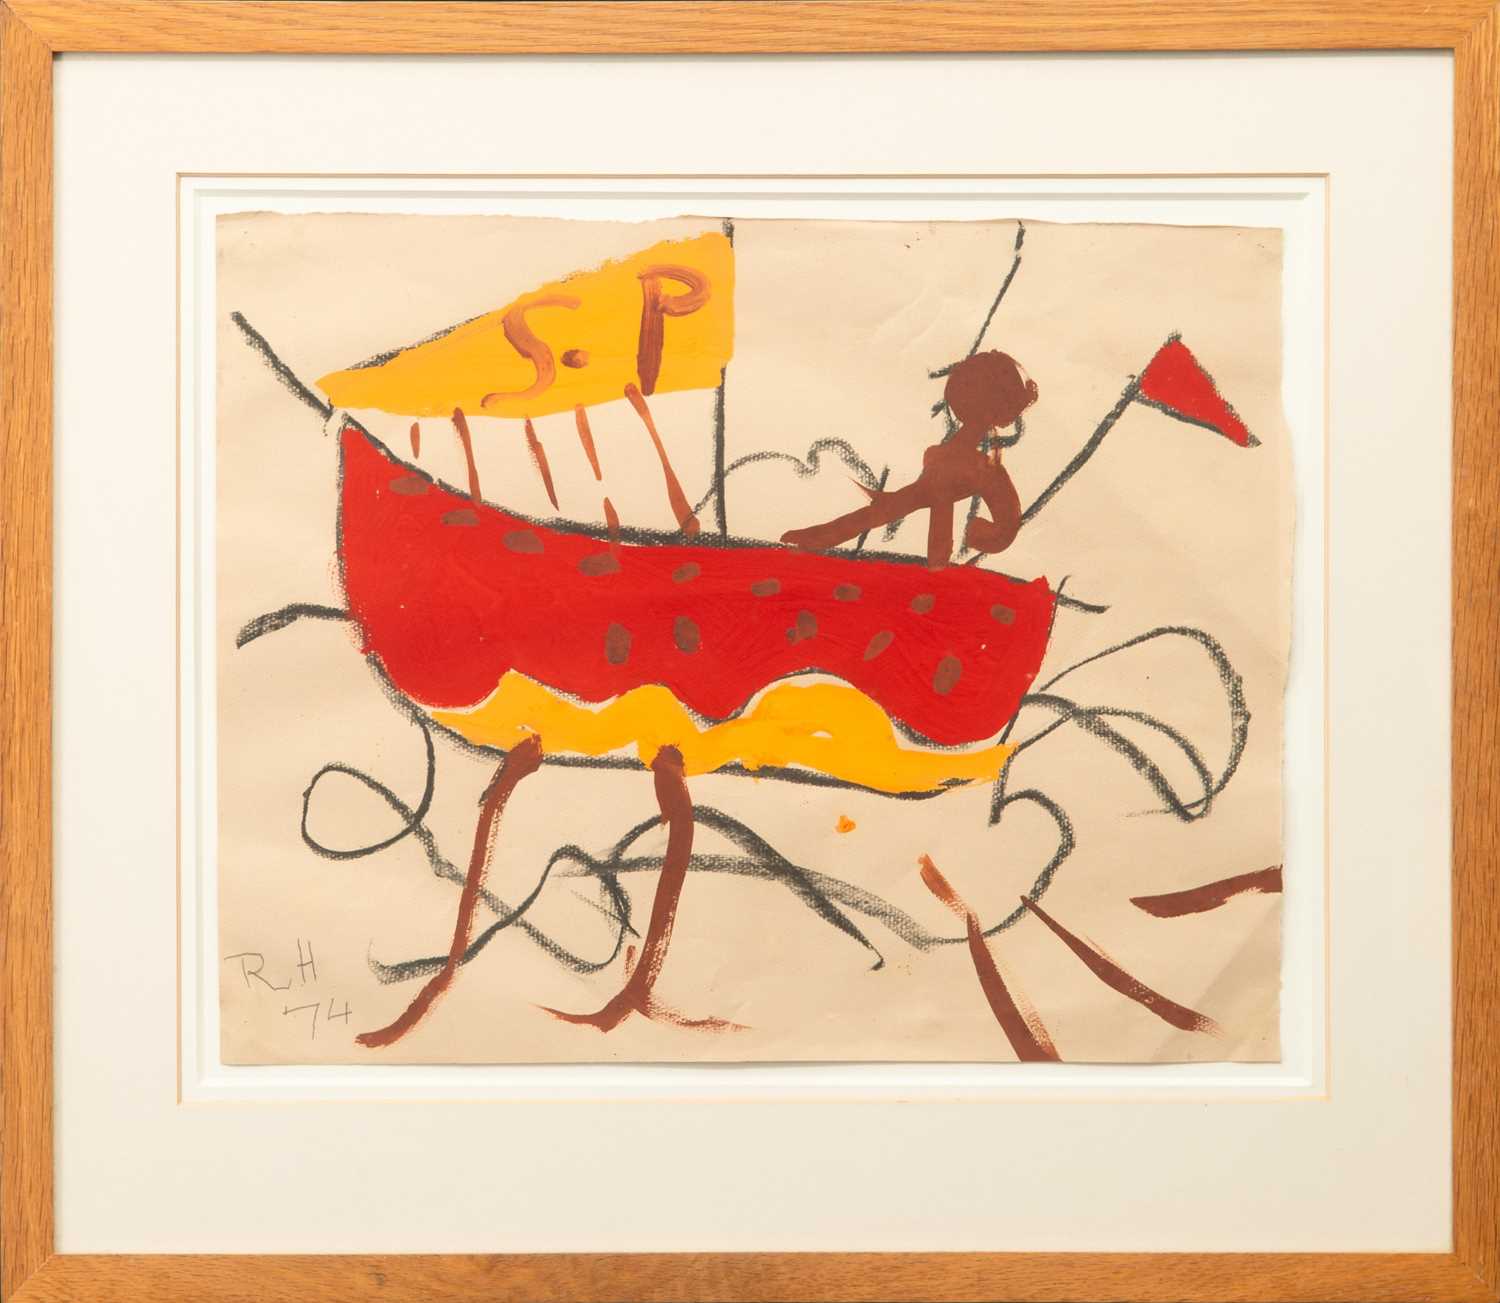 Roger HILTON (1911-1975) Boat with Man and Flag, 1974 - Image 2 of 5